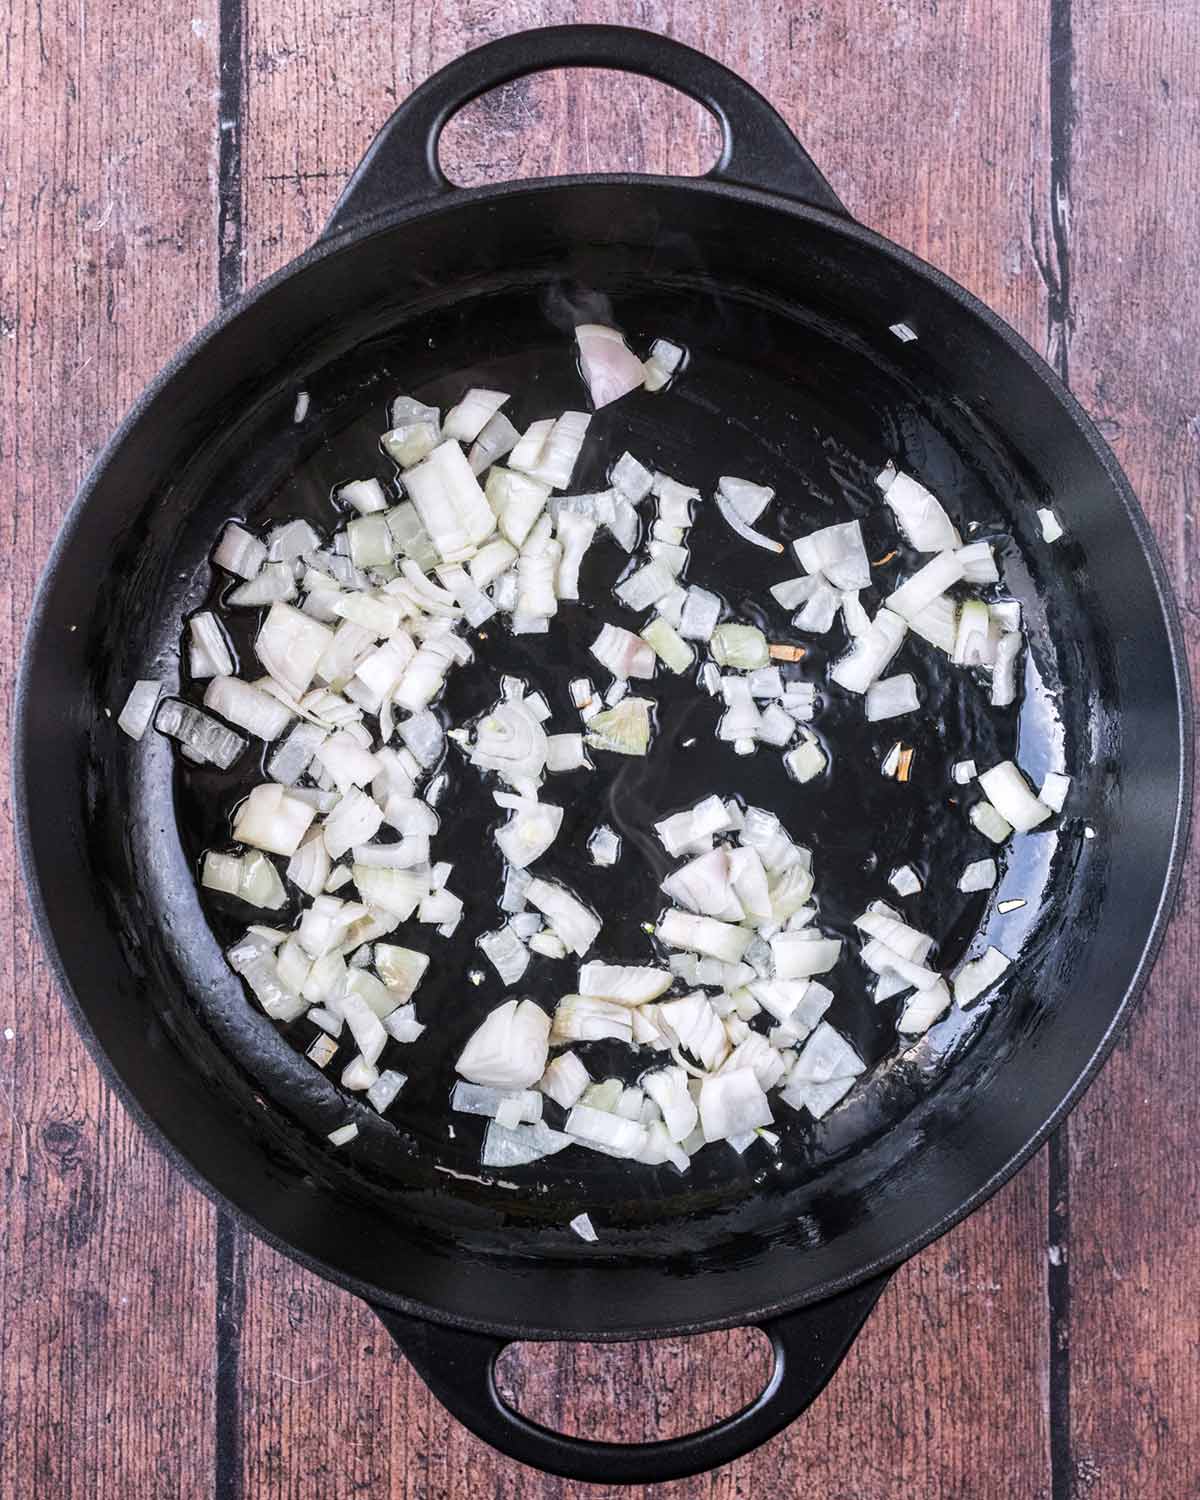 Diced shallots cooking in oil in a large black pan.